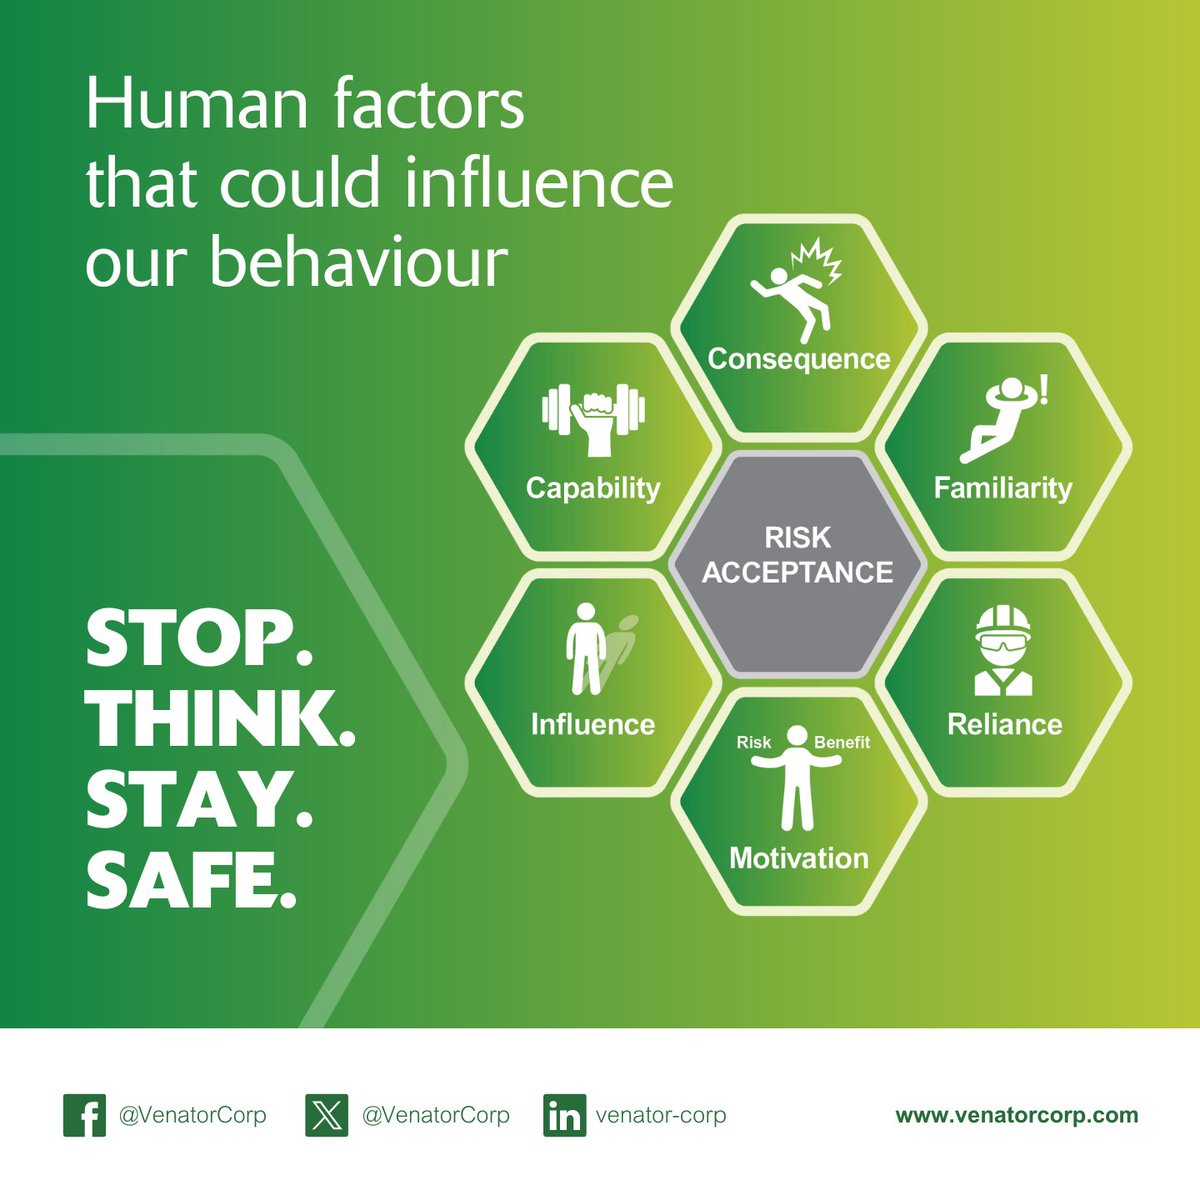 At Venator, we recognize the critical role #HumanFactors play in influencing risk in the workplace.  That’s why we prioritize understanding these factors and implementing strategies to mitigate risks effectively. 

#SafetyFirst #VenatorSafety  #ZEROHarmWeek